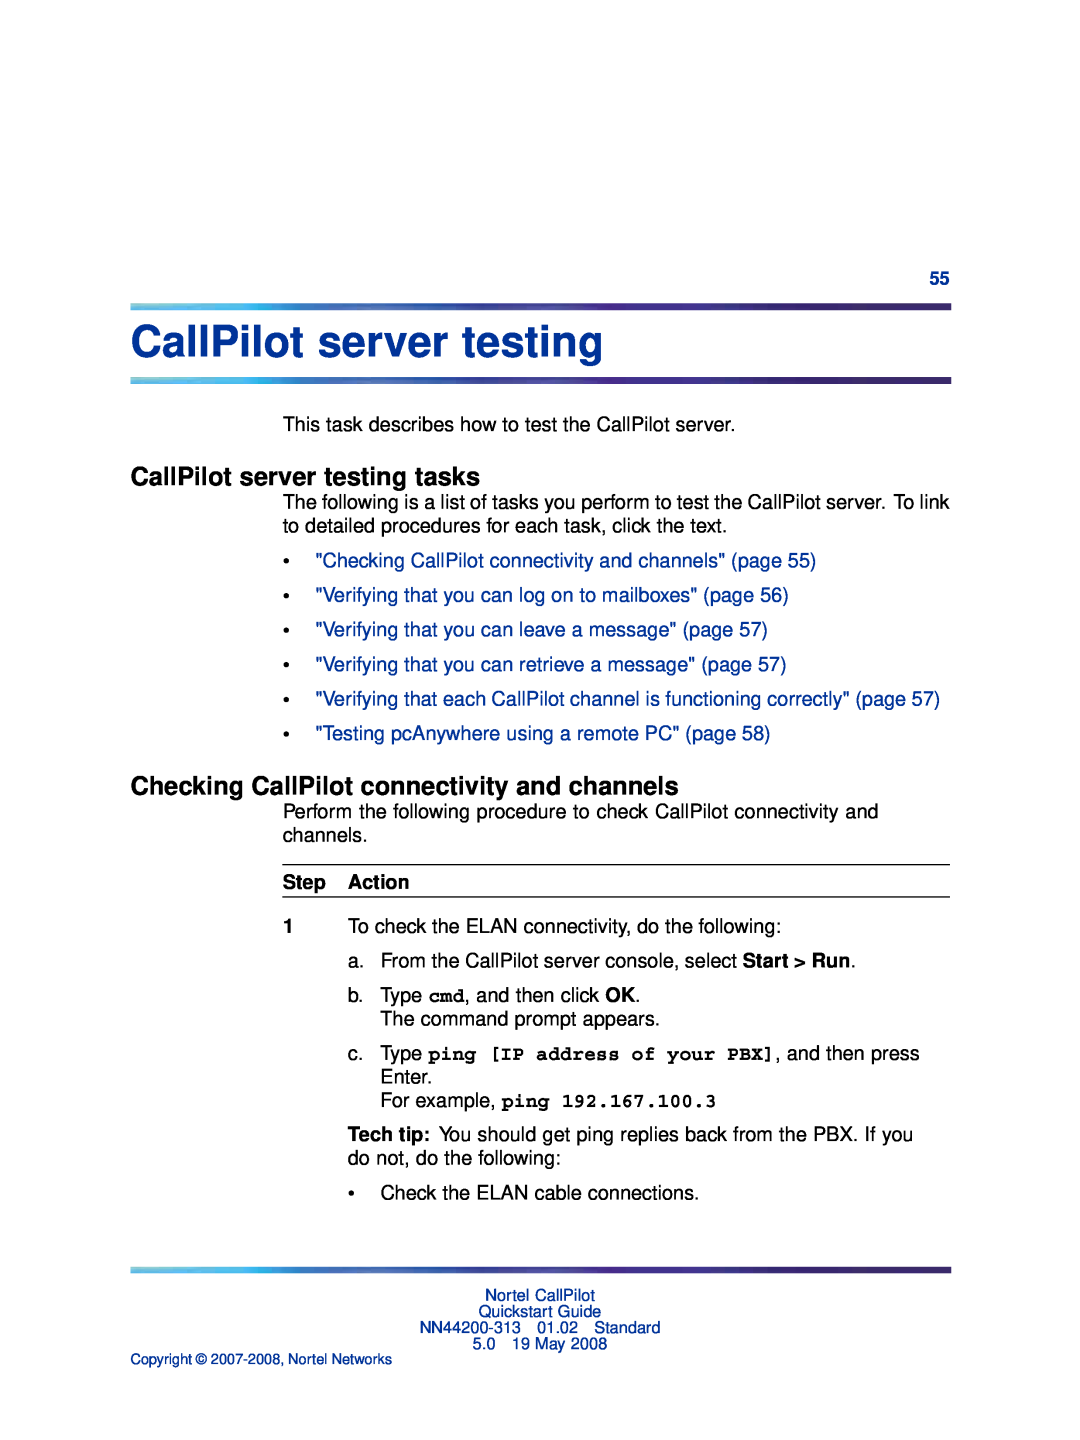 Nortel Networks NN44200-313 CallPilot server testing tasks, Checking CallPilot connectivity and channels, Step Action 